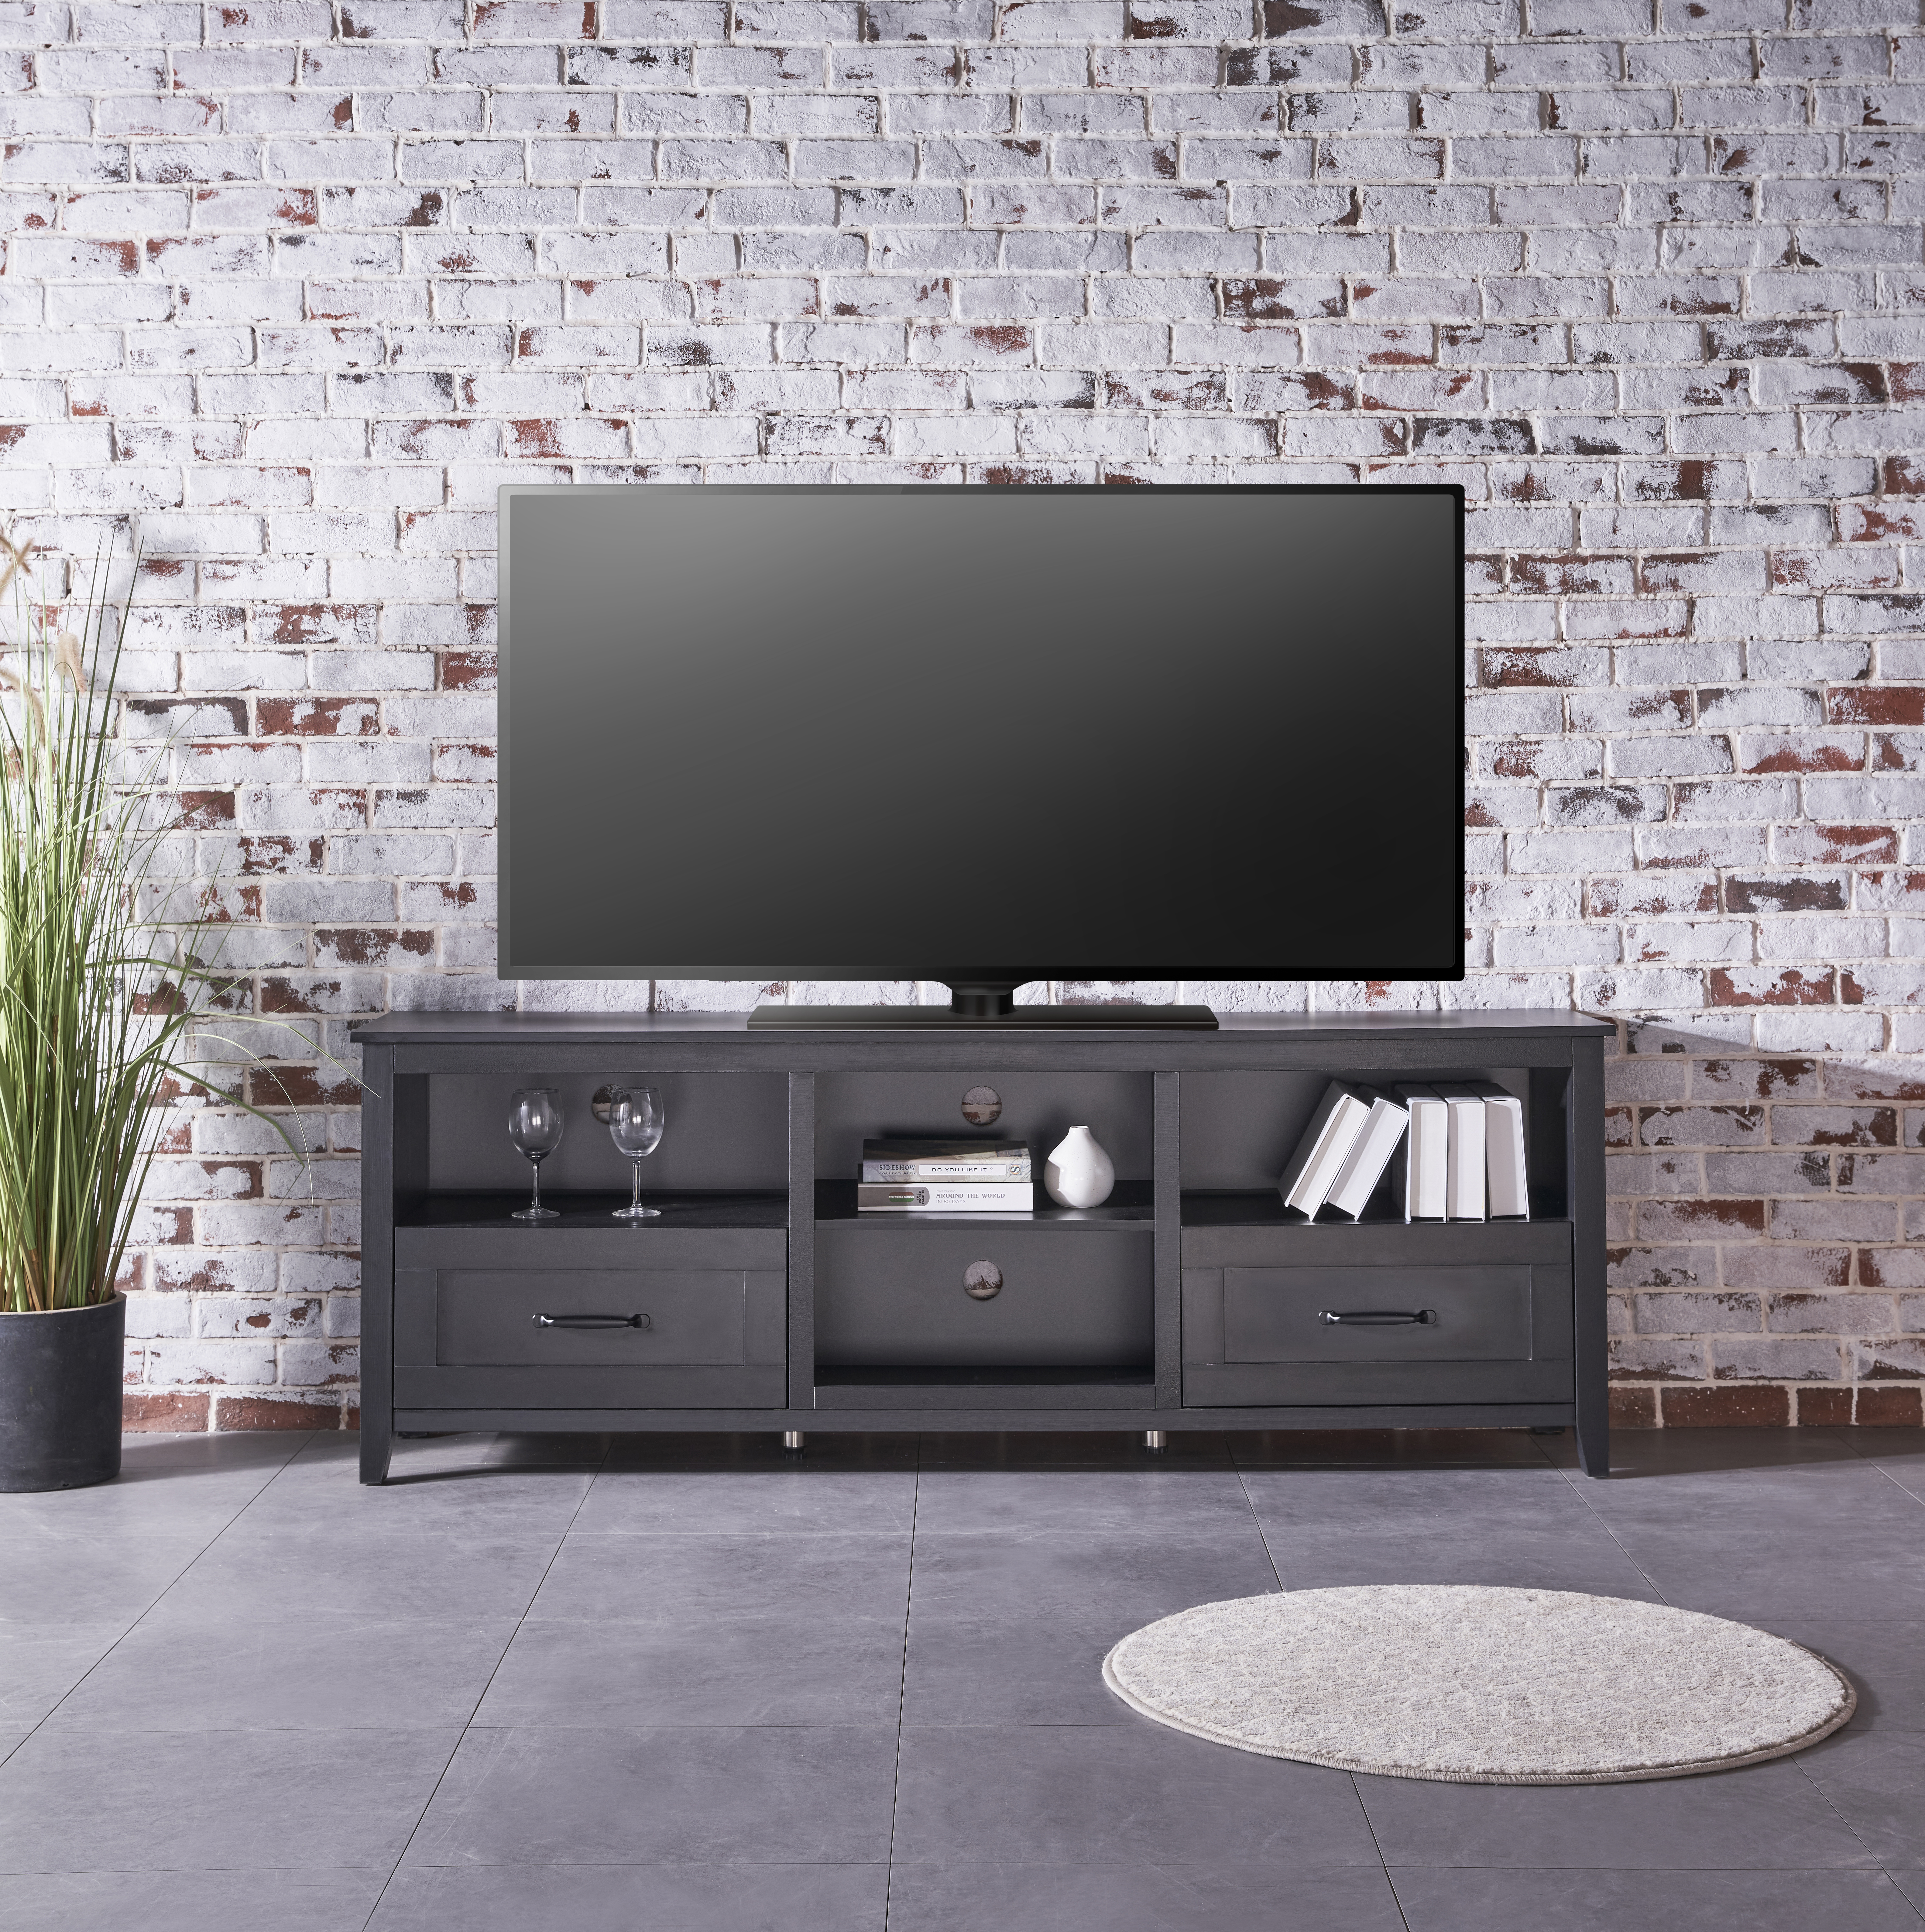 70.08 Inch Length Black TV Stand for Living Room and Bedroom, with 2 Drawers and 4 High-Capacity Storage Compartment.-Boyel Living